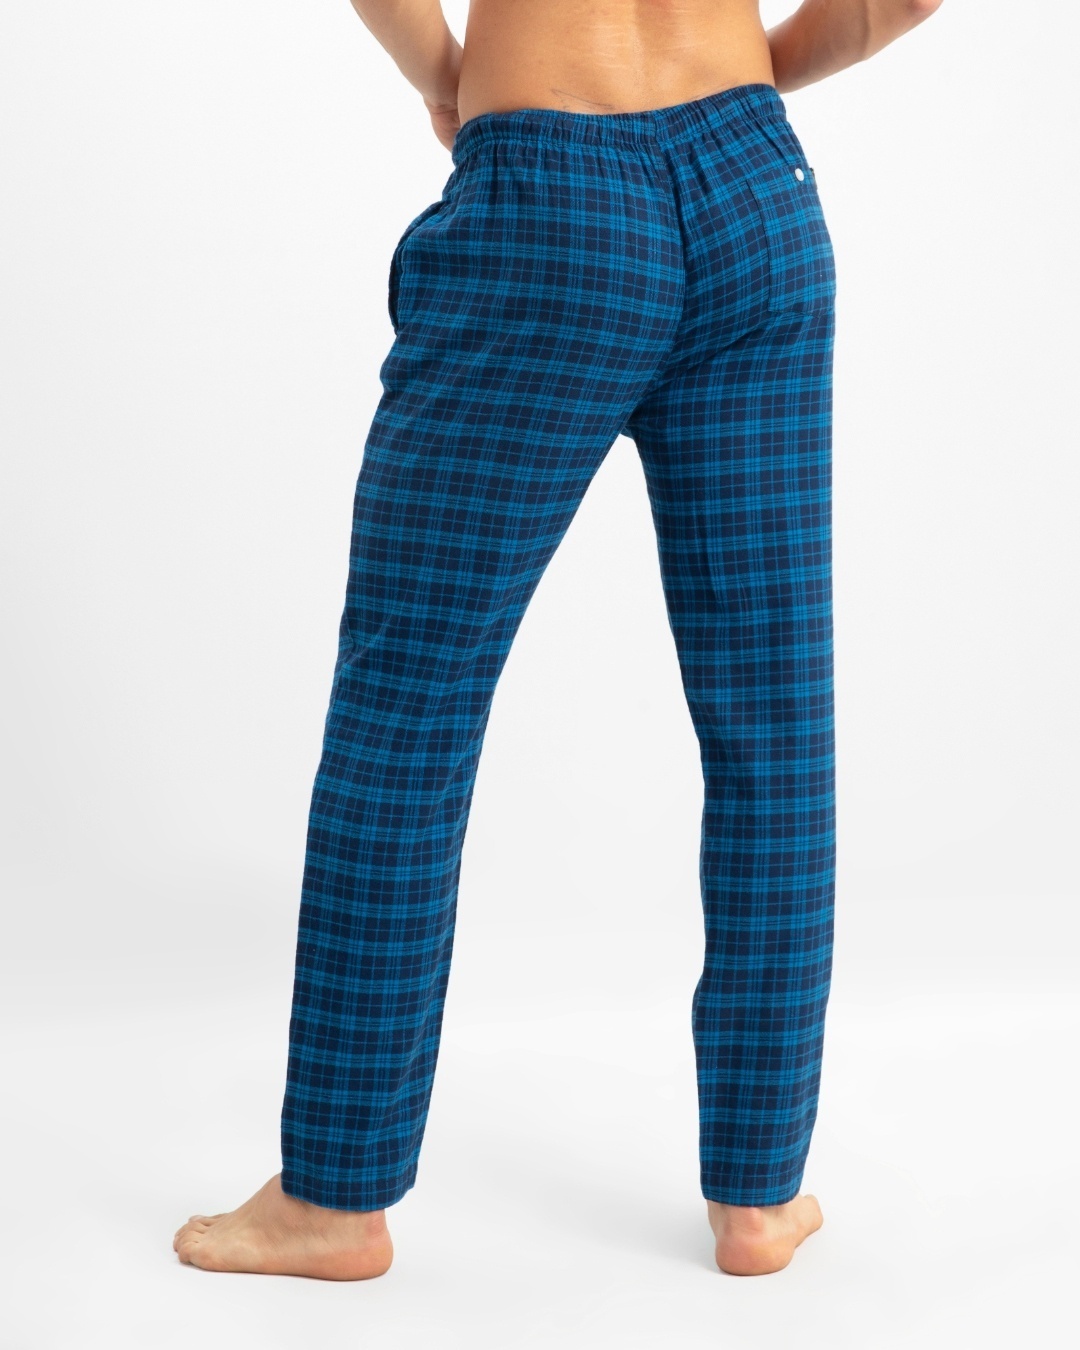 Shop Men's Blue Checked Elasticated Cotton Relaxed Fit Pyjamas-Design